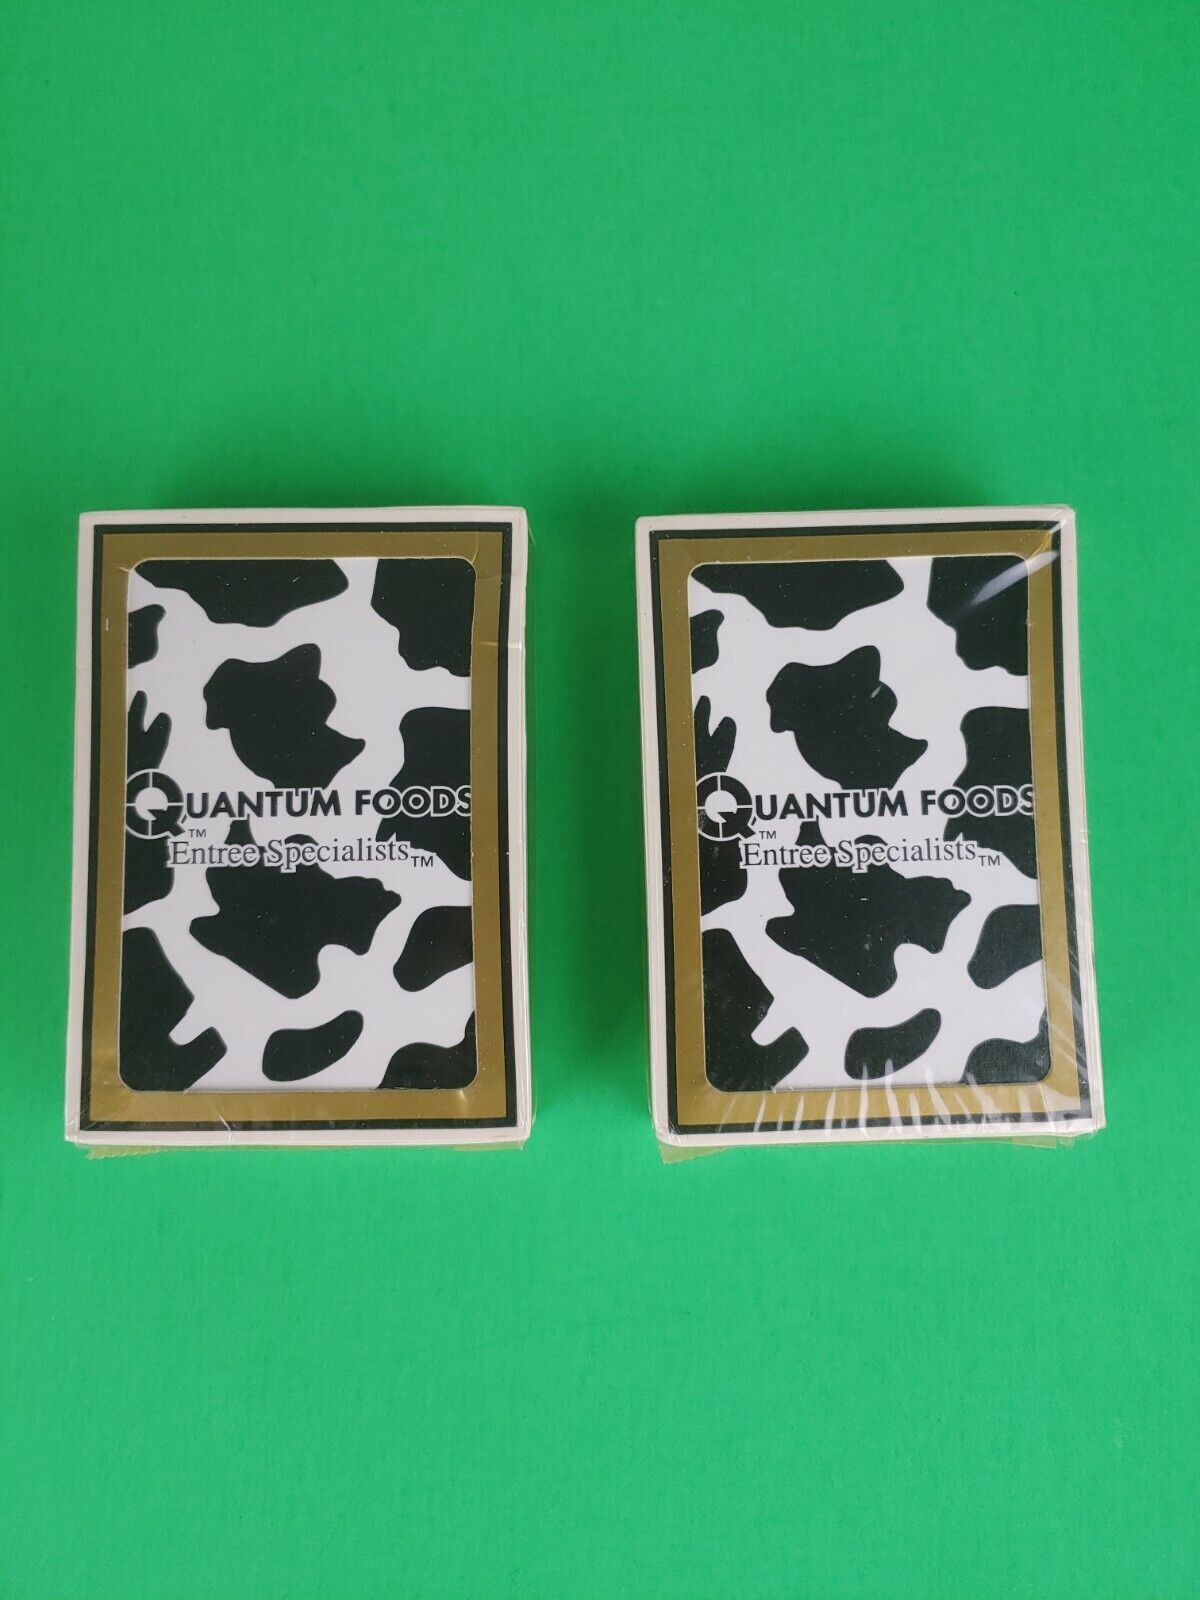 2 VTG Quantum Foods Gemaãco Poker Cow Theme Playing Cards Plastic Coated Sealed 